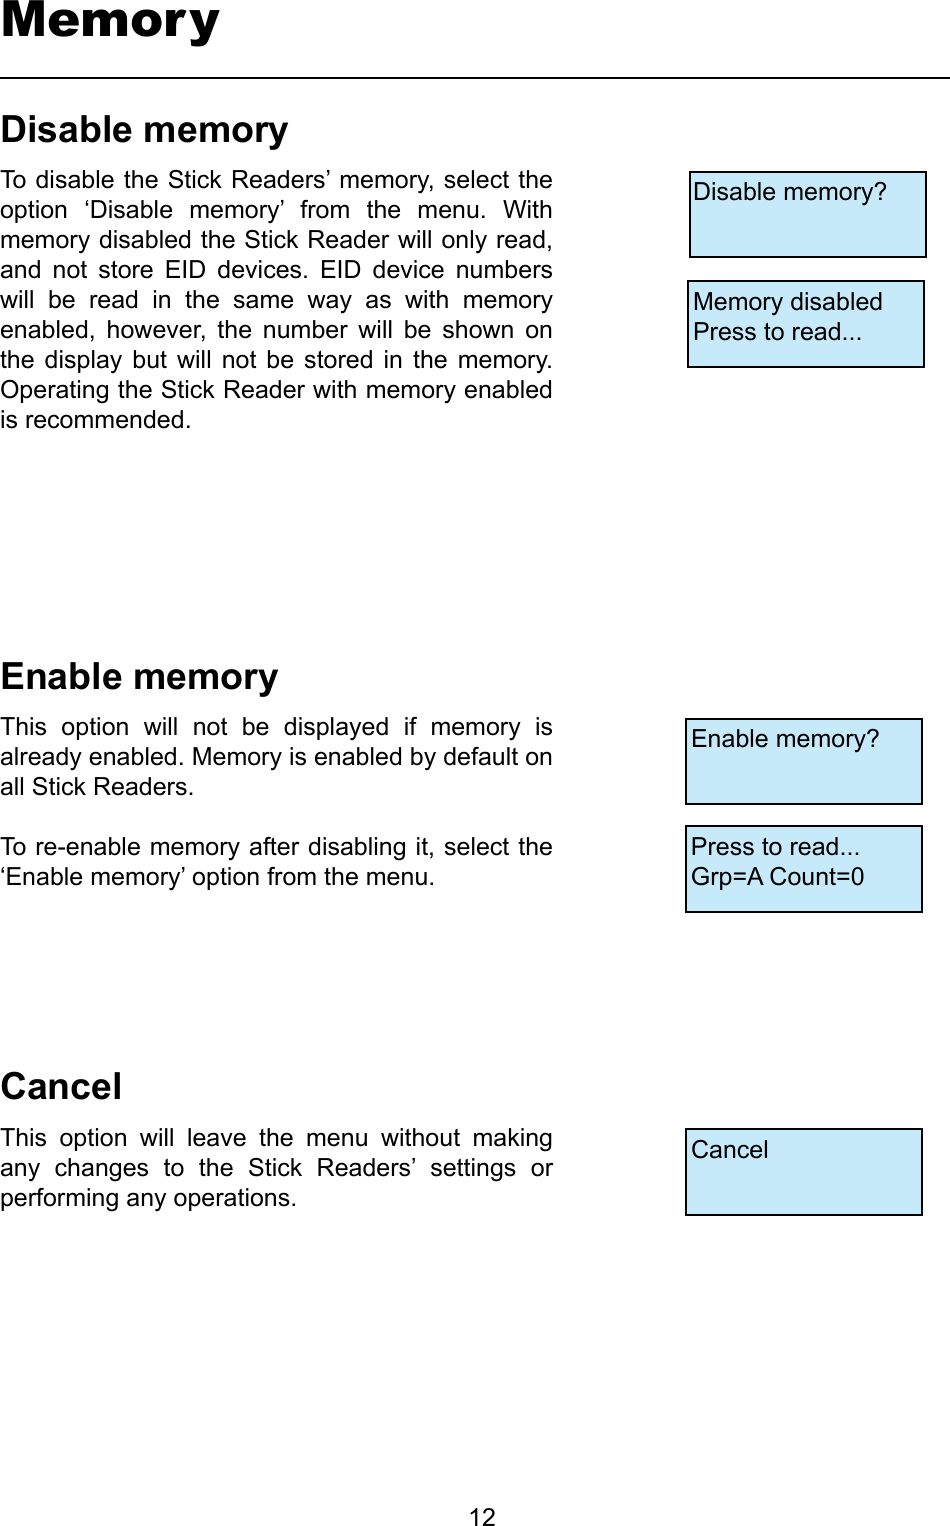         12MemoryDisable memory?Memory disabledPress to read...Enable memory?Press to read...Grp=A Count=0CancelDisablememoryTo disable the Stick Readers’ memory, select the option  ‘Disable  memory’  from  the  menu.  With memory disabled the Stick Reader will only read, and  not  store  EID  devices.  EID  device  numbers will  be  read  in  the  same  way  as  with  memory enabled,  however,  the  number  will  be  shown  on the  display  but  will not  be  stored in  the  memory. Operating the Stick Reader with memory enabled is recommended.EnablememoryThis  option  will  not  be  displayed  if  memory  is already enabled. Memory is enabled by default on all Stick Readers.To re-enable memory after disabling it, select the ‘Enable memory’ option from the menu.CancelThis  option  will  leave  the  menu  without  making any  changes  to  the  Stick  Readers’  settings  or performing any operations.